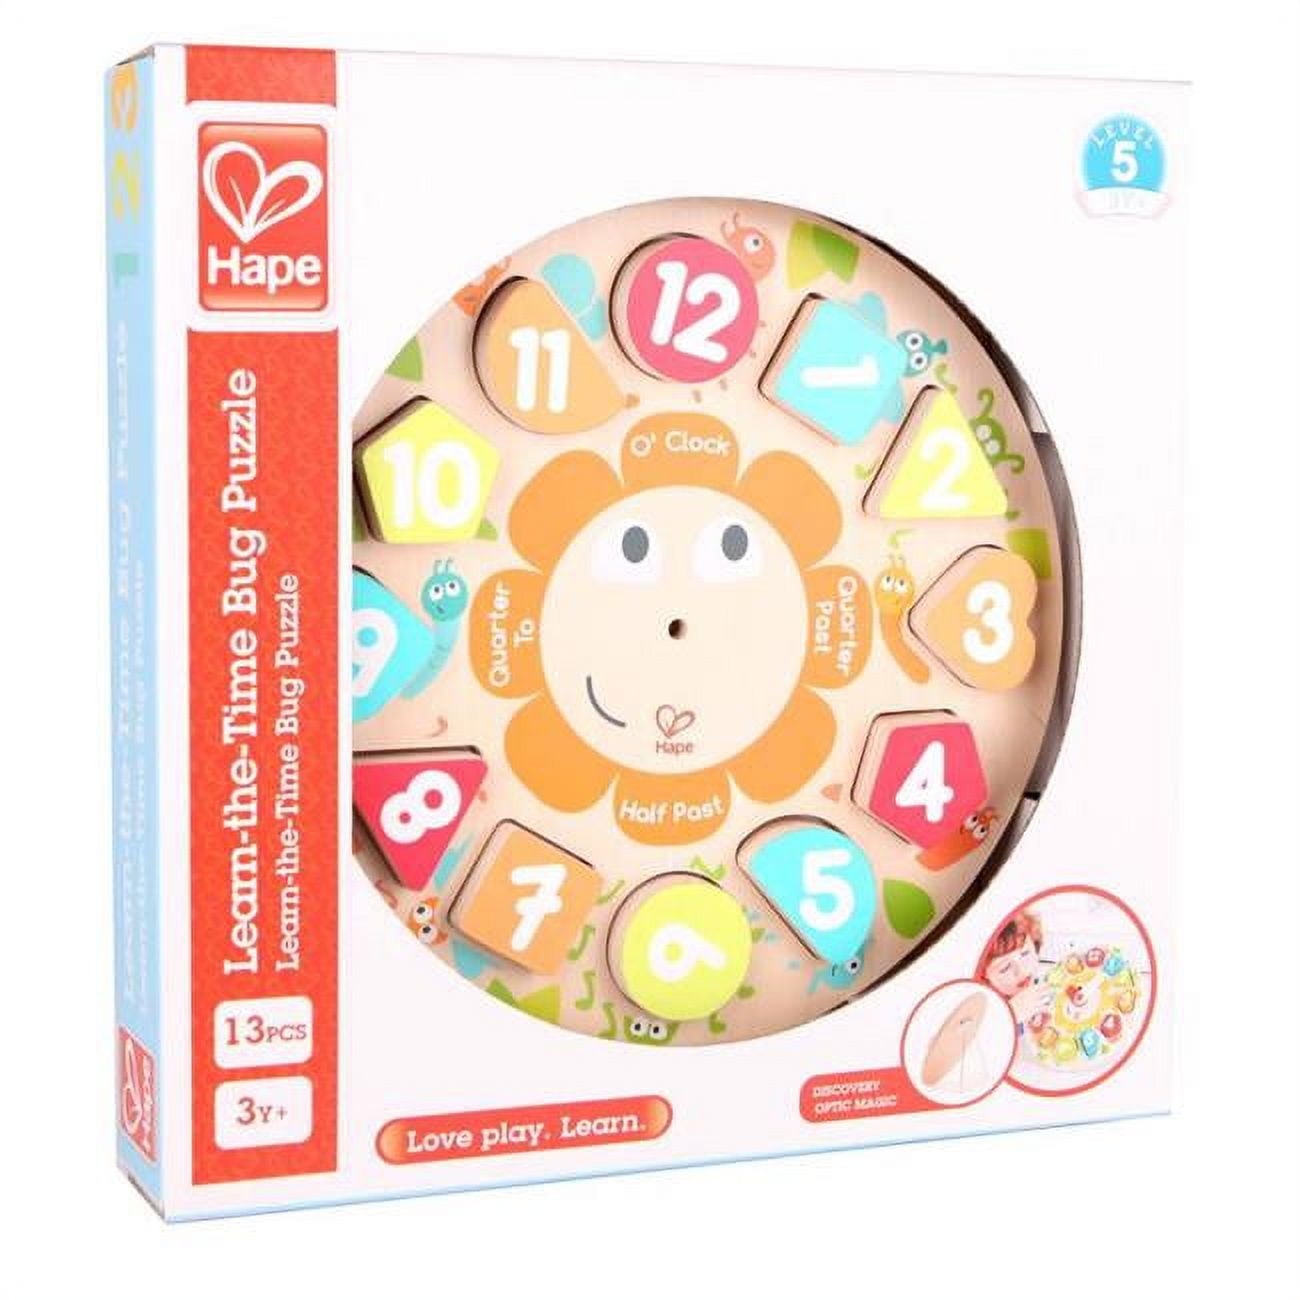 Picture of Hape Toys 6063644 Assorted Color Hardwood Chunky Clock Puzzle, 13 Piece